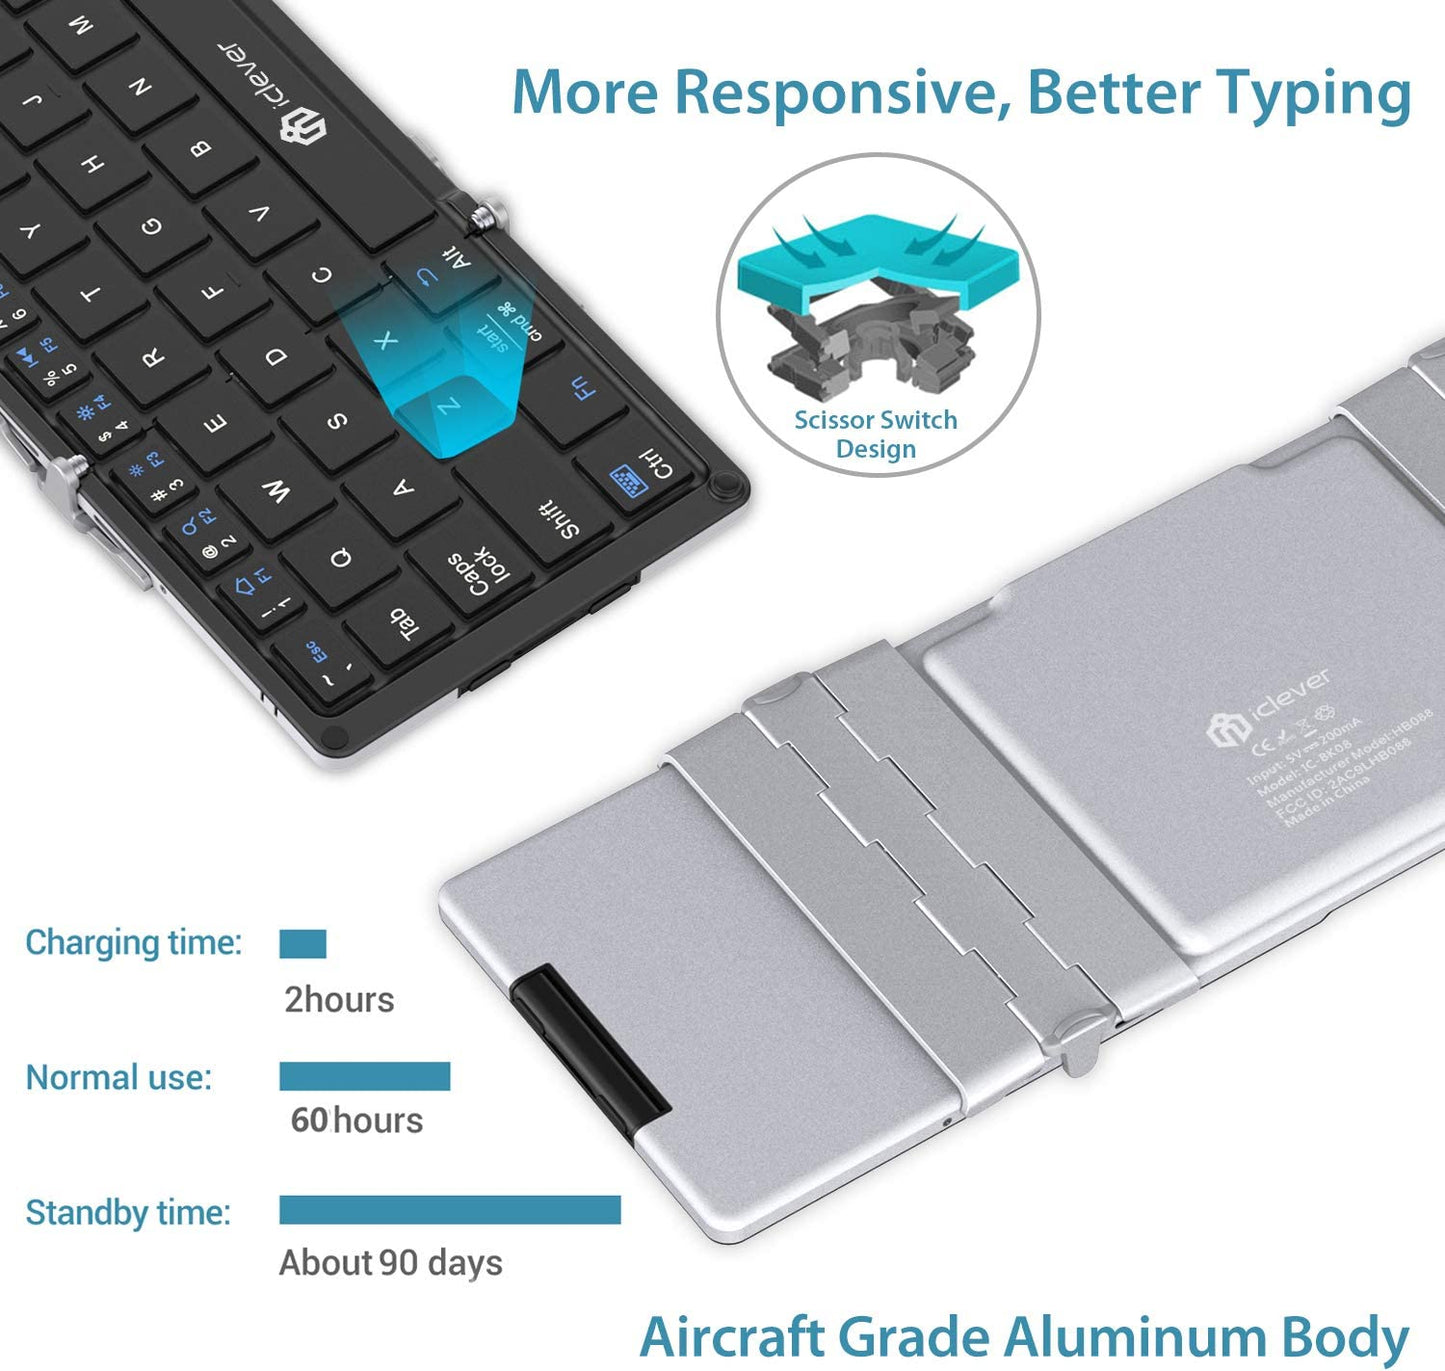 Detailed information about a Bluetooth foldable keyboard. The text reads, "More responsive, better typing. Aircraft Grade aluminium body. Charging time 2 hours. 